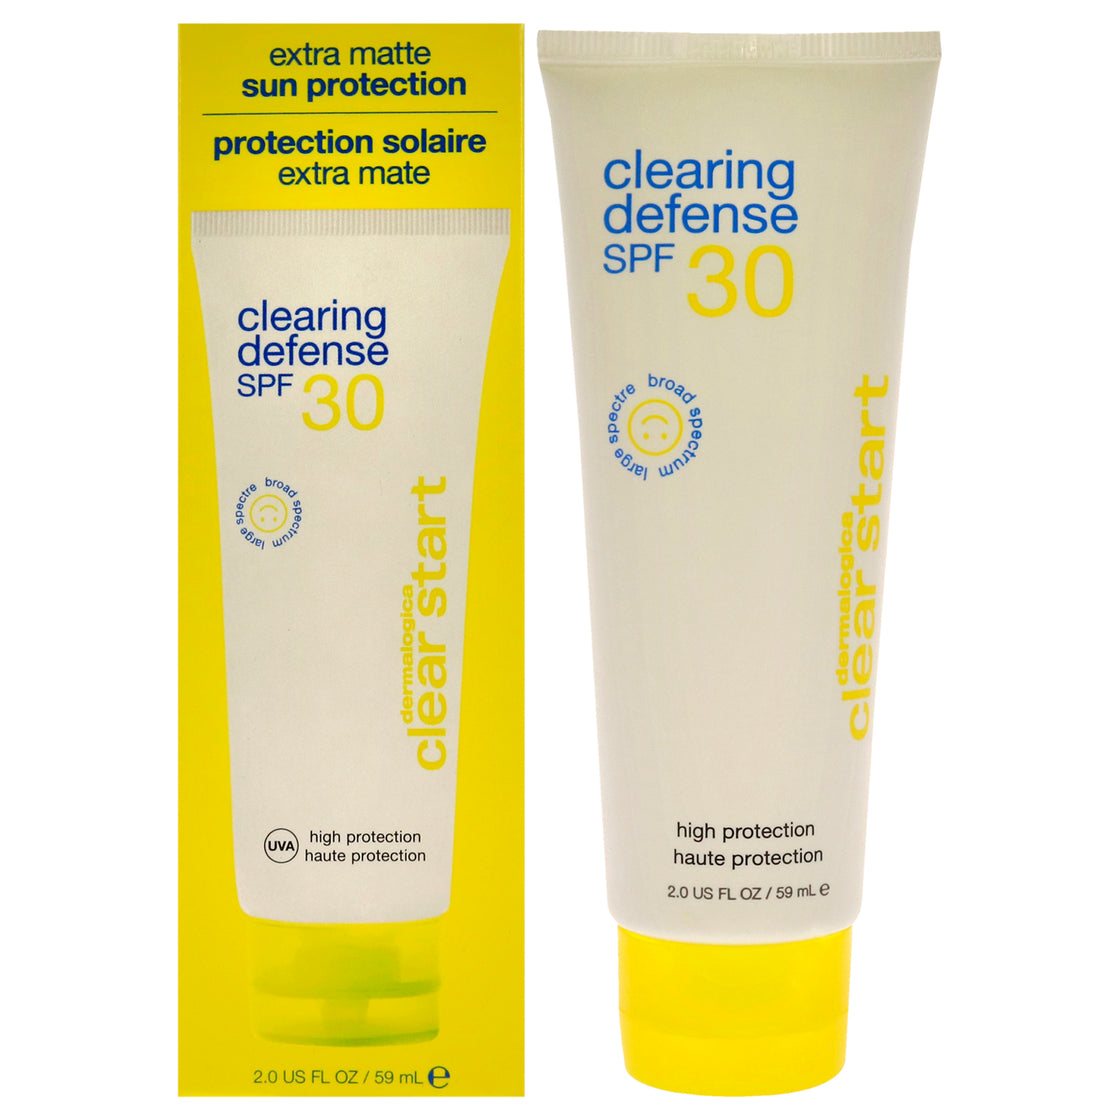 Clearing Defense SPF 30 by Dermalogica for Unisex - 2 oz Moisturizer